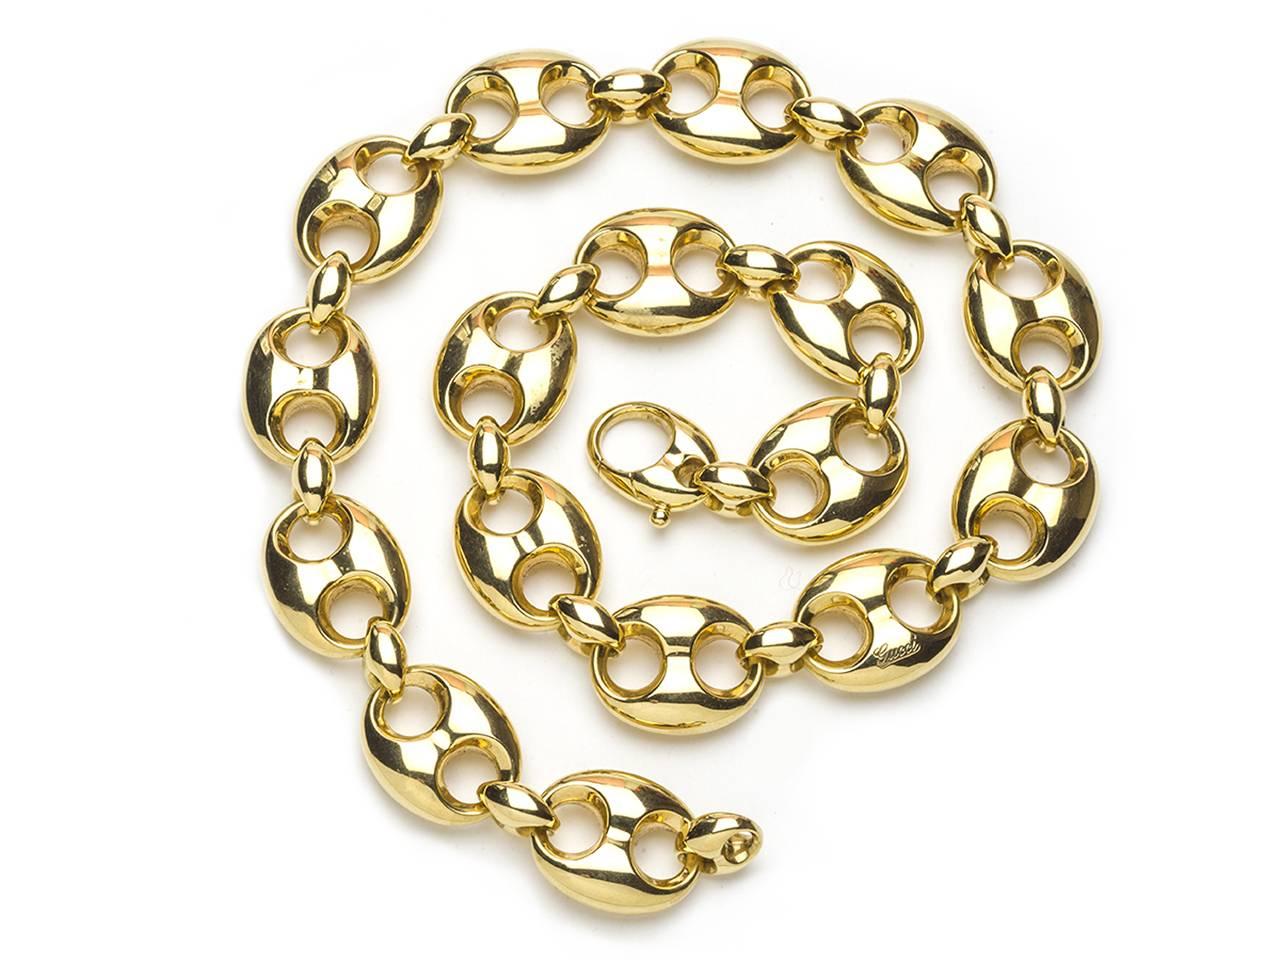 18k gold link necklace. Signed GUCCI MADE IN ITALY.